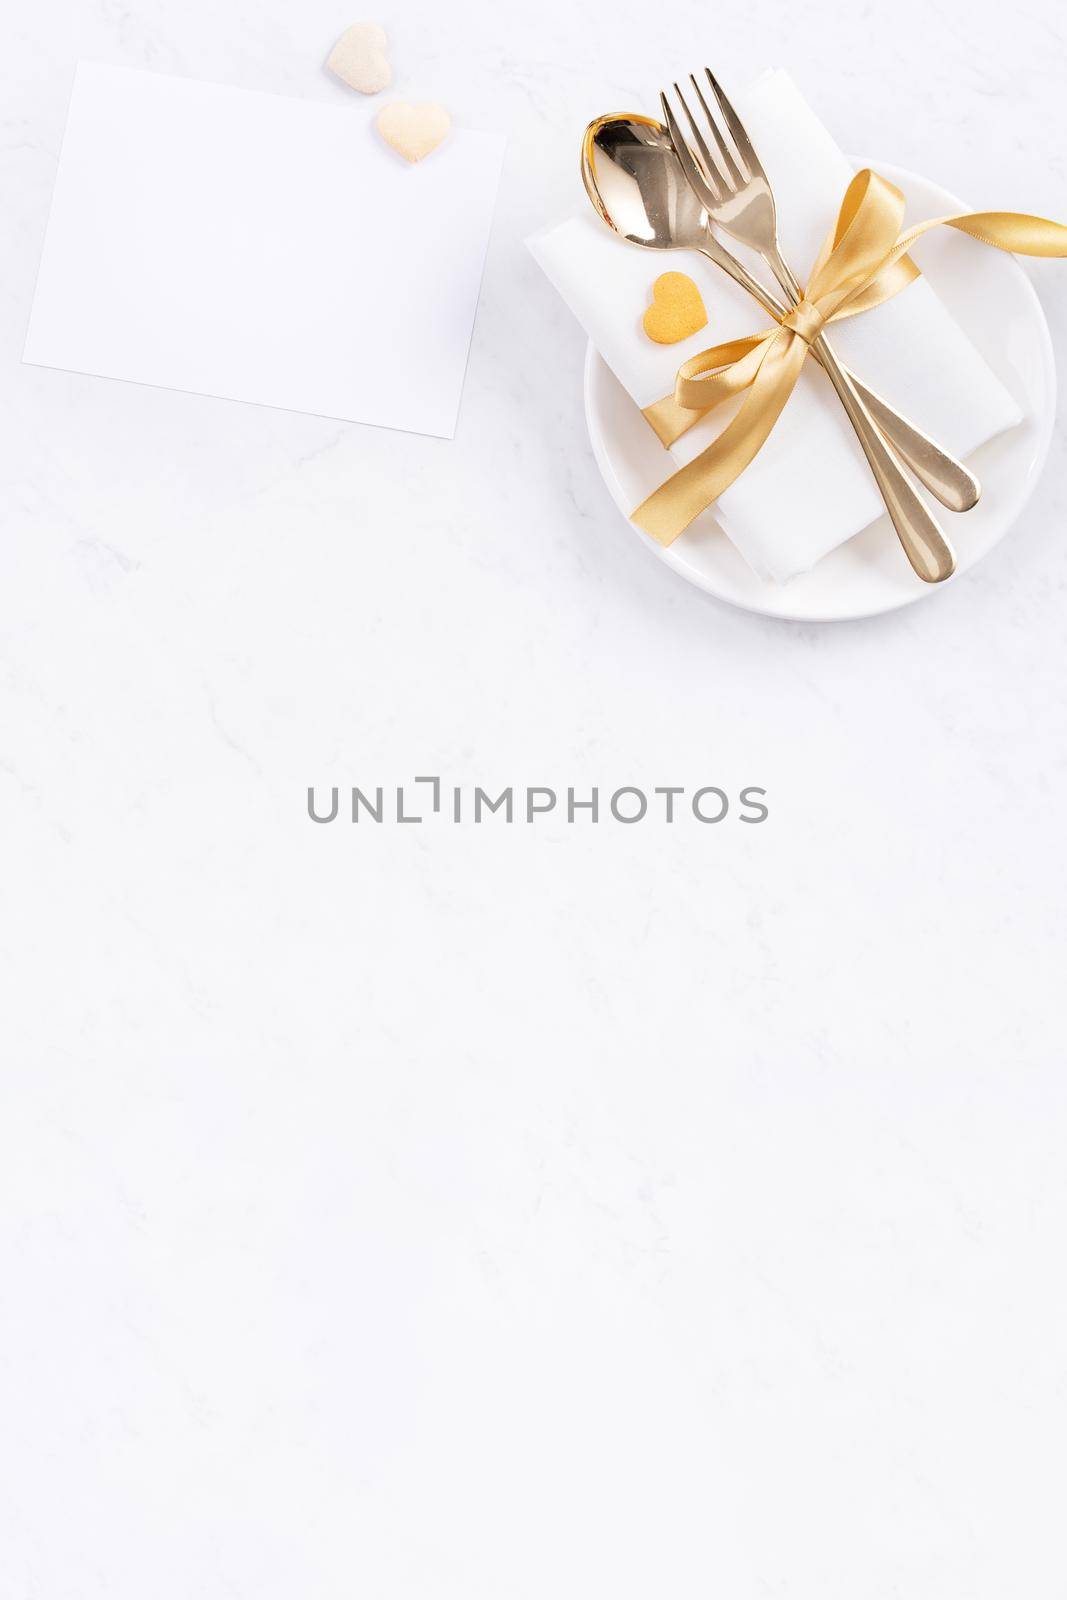 Valentine's Day, Mother's Day, holiday dating meal, banquet design concept - White plate and golden ribbon on marble background, top view, flat lay. by ROMIXIMAGE